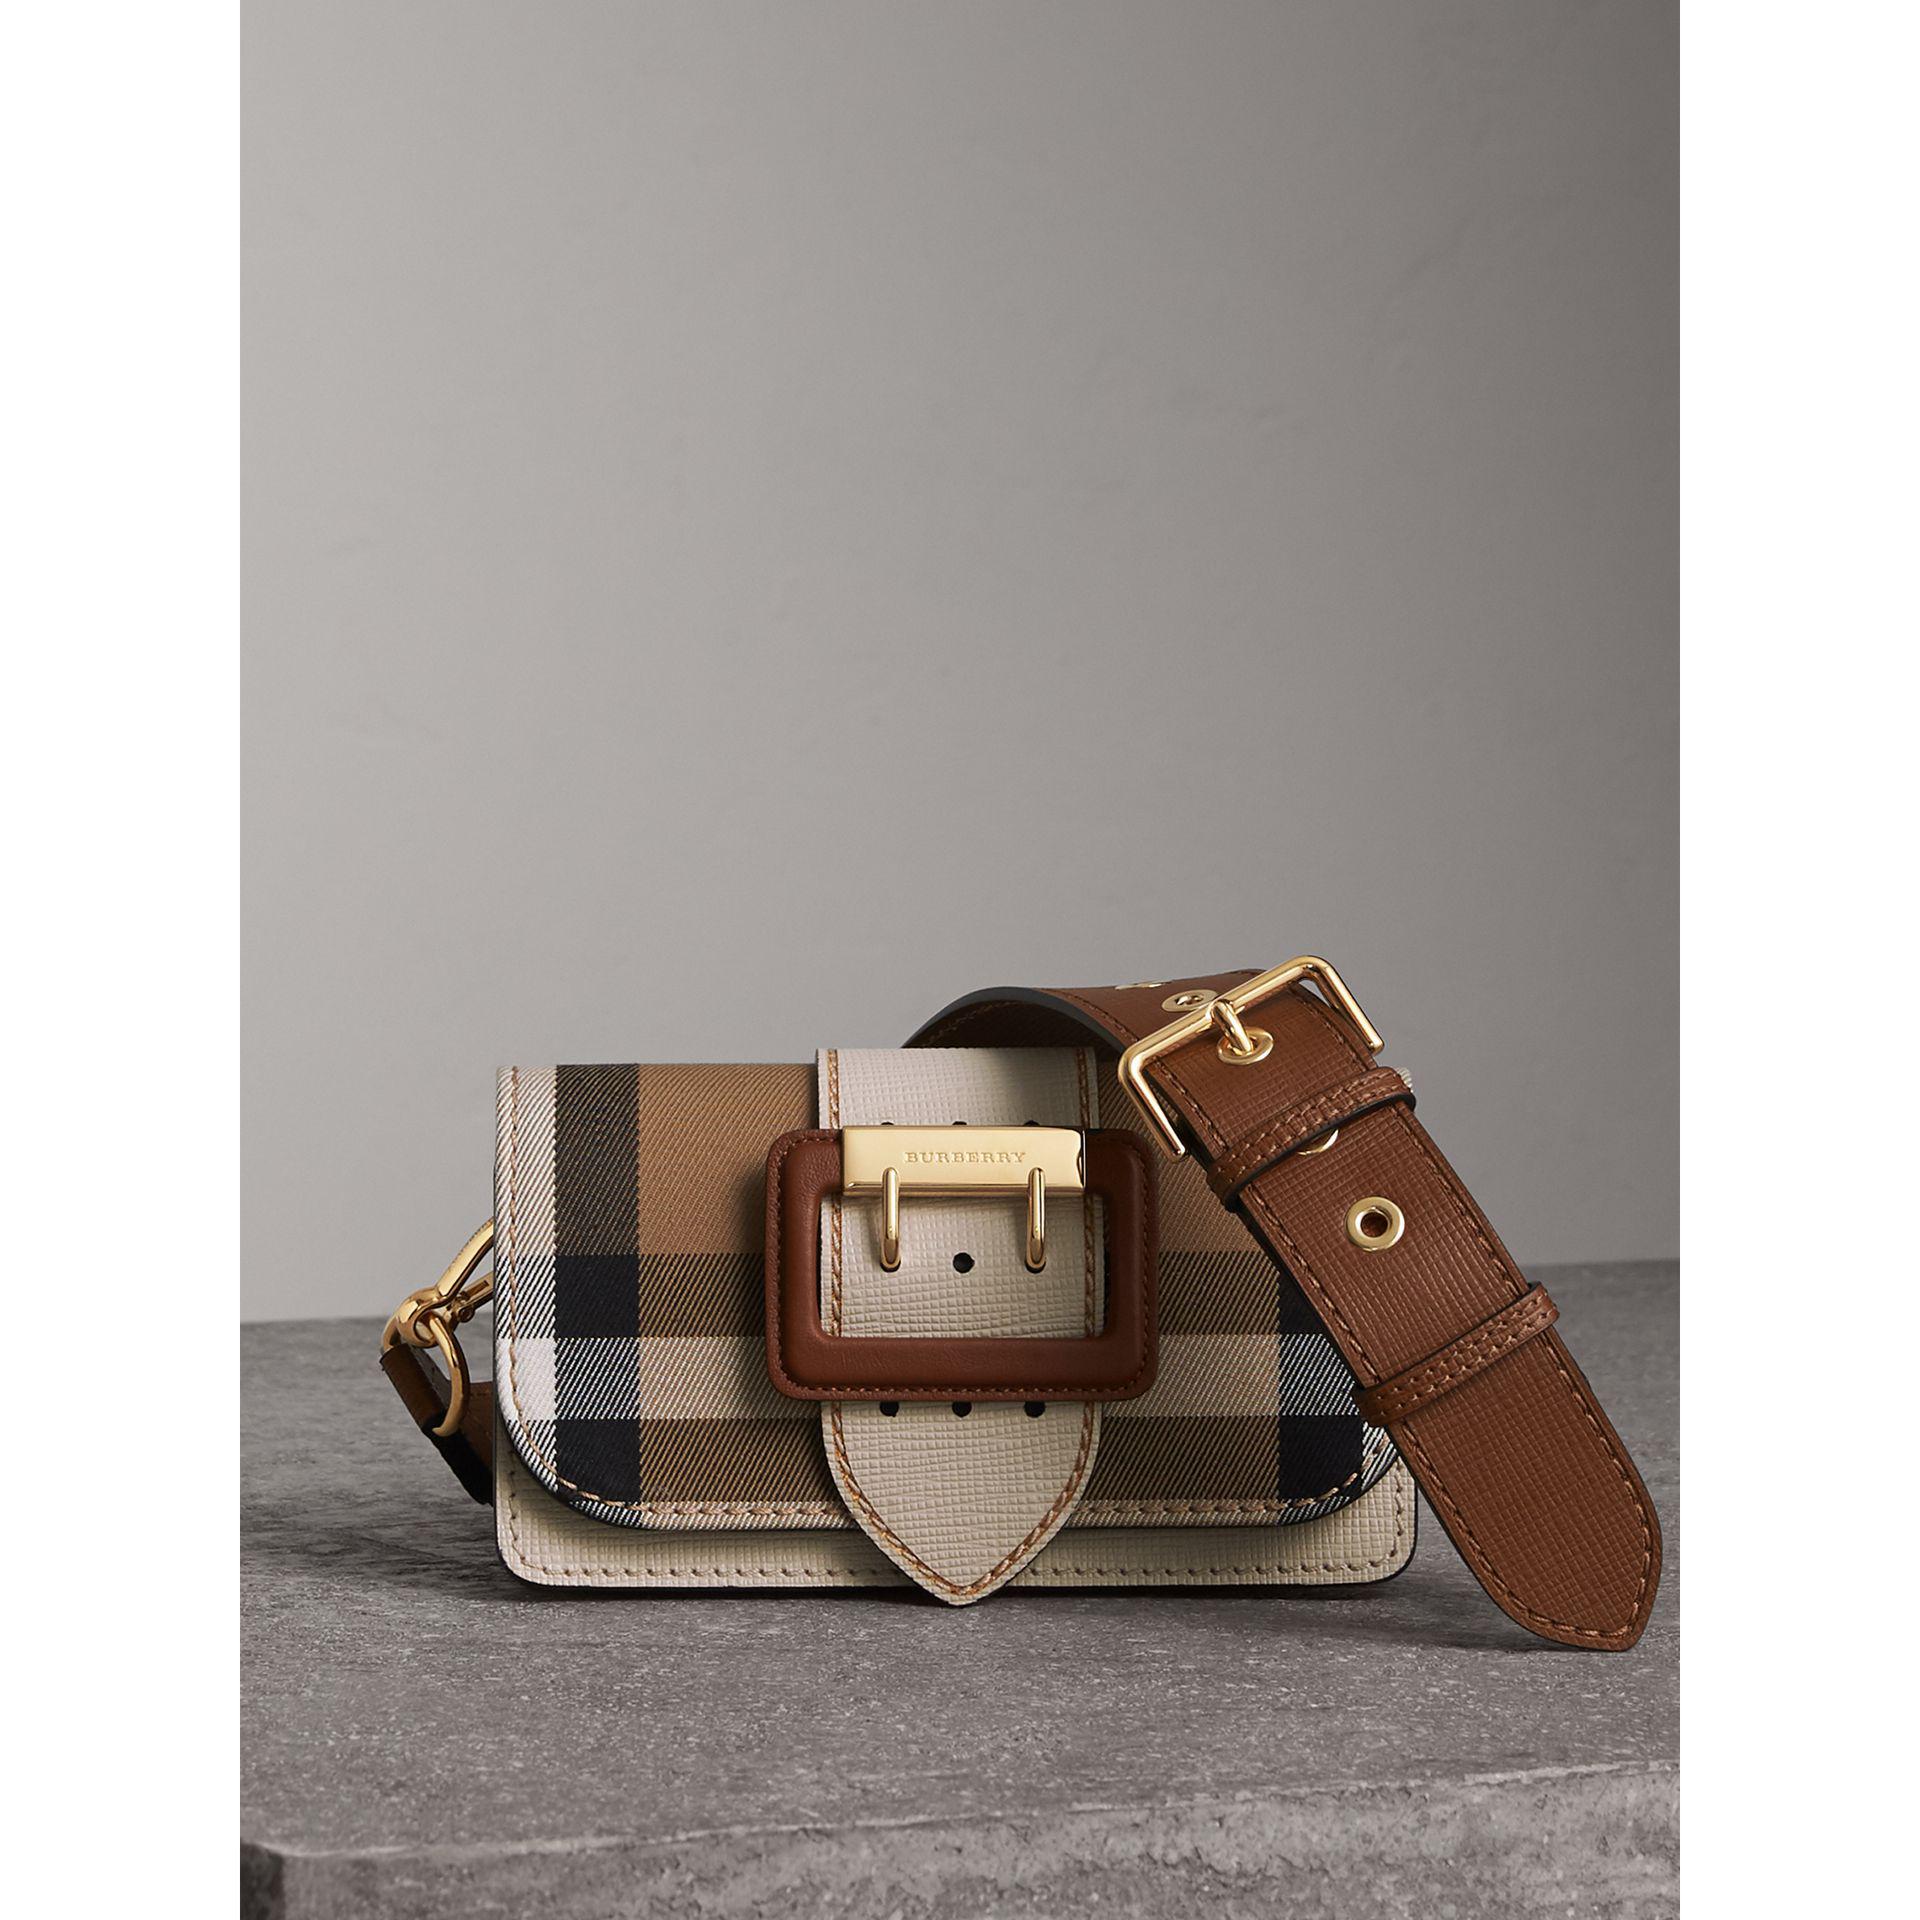 Cross body bags Burberry - The Buckle small bag - 40224601